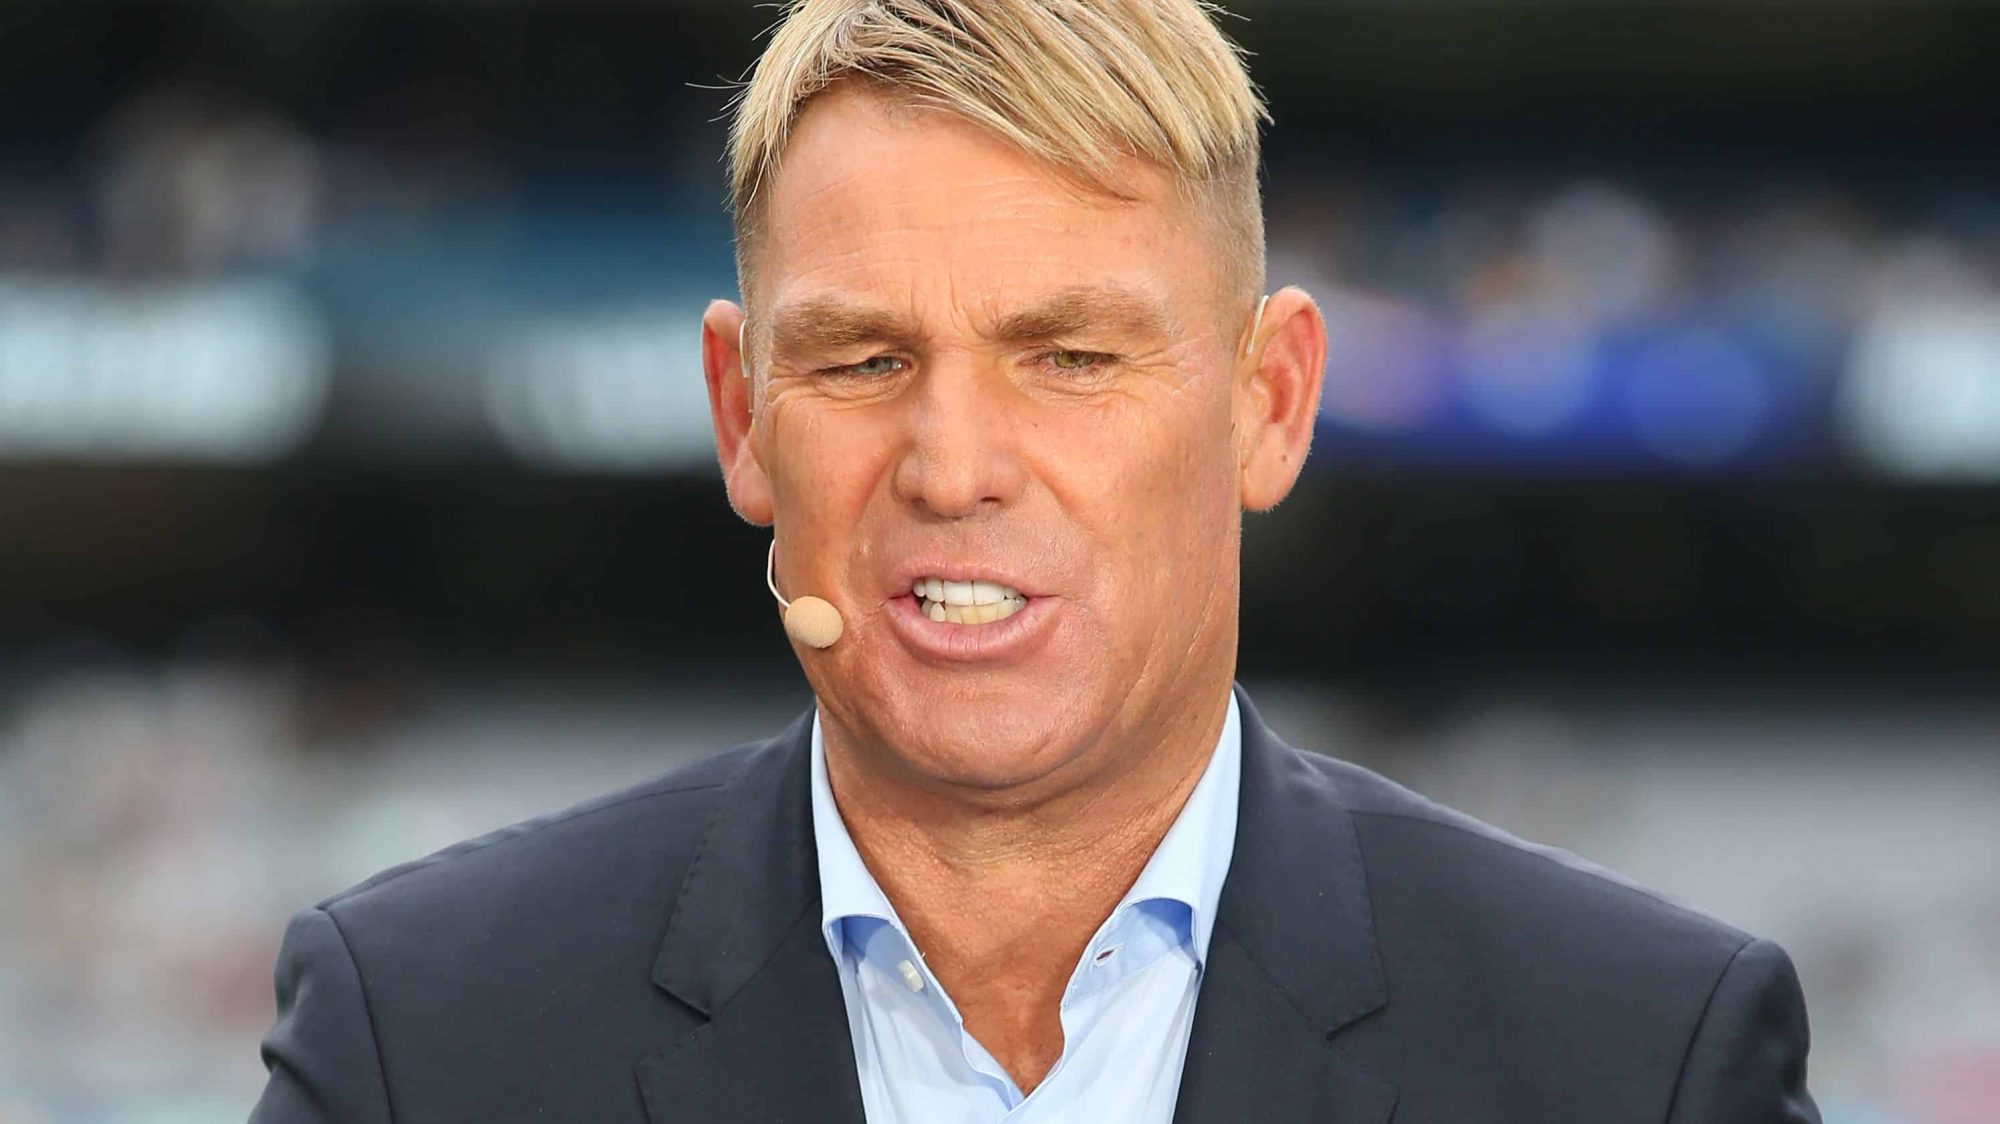 Australia Legend Shane Warne Dies of Suspected Heart Attack At 52: Reports